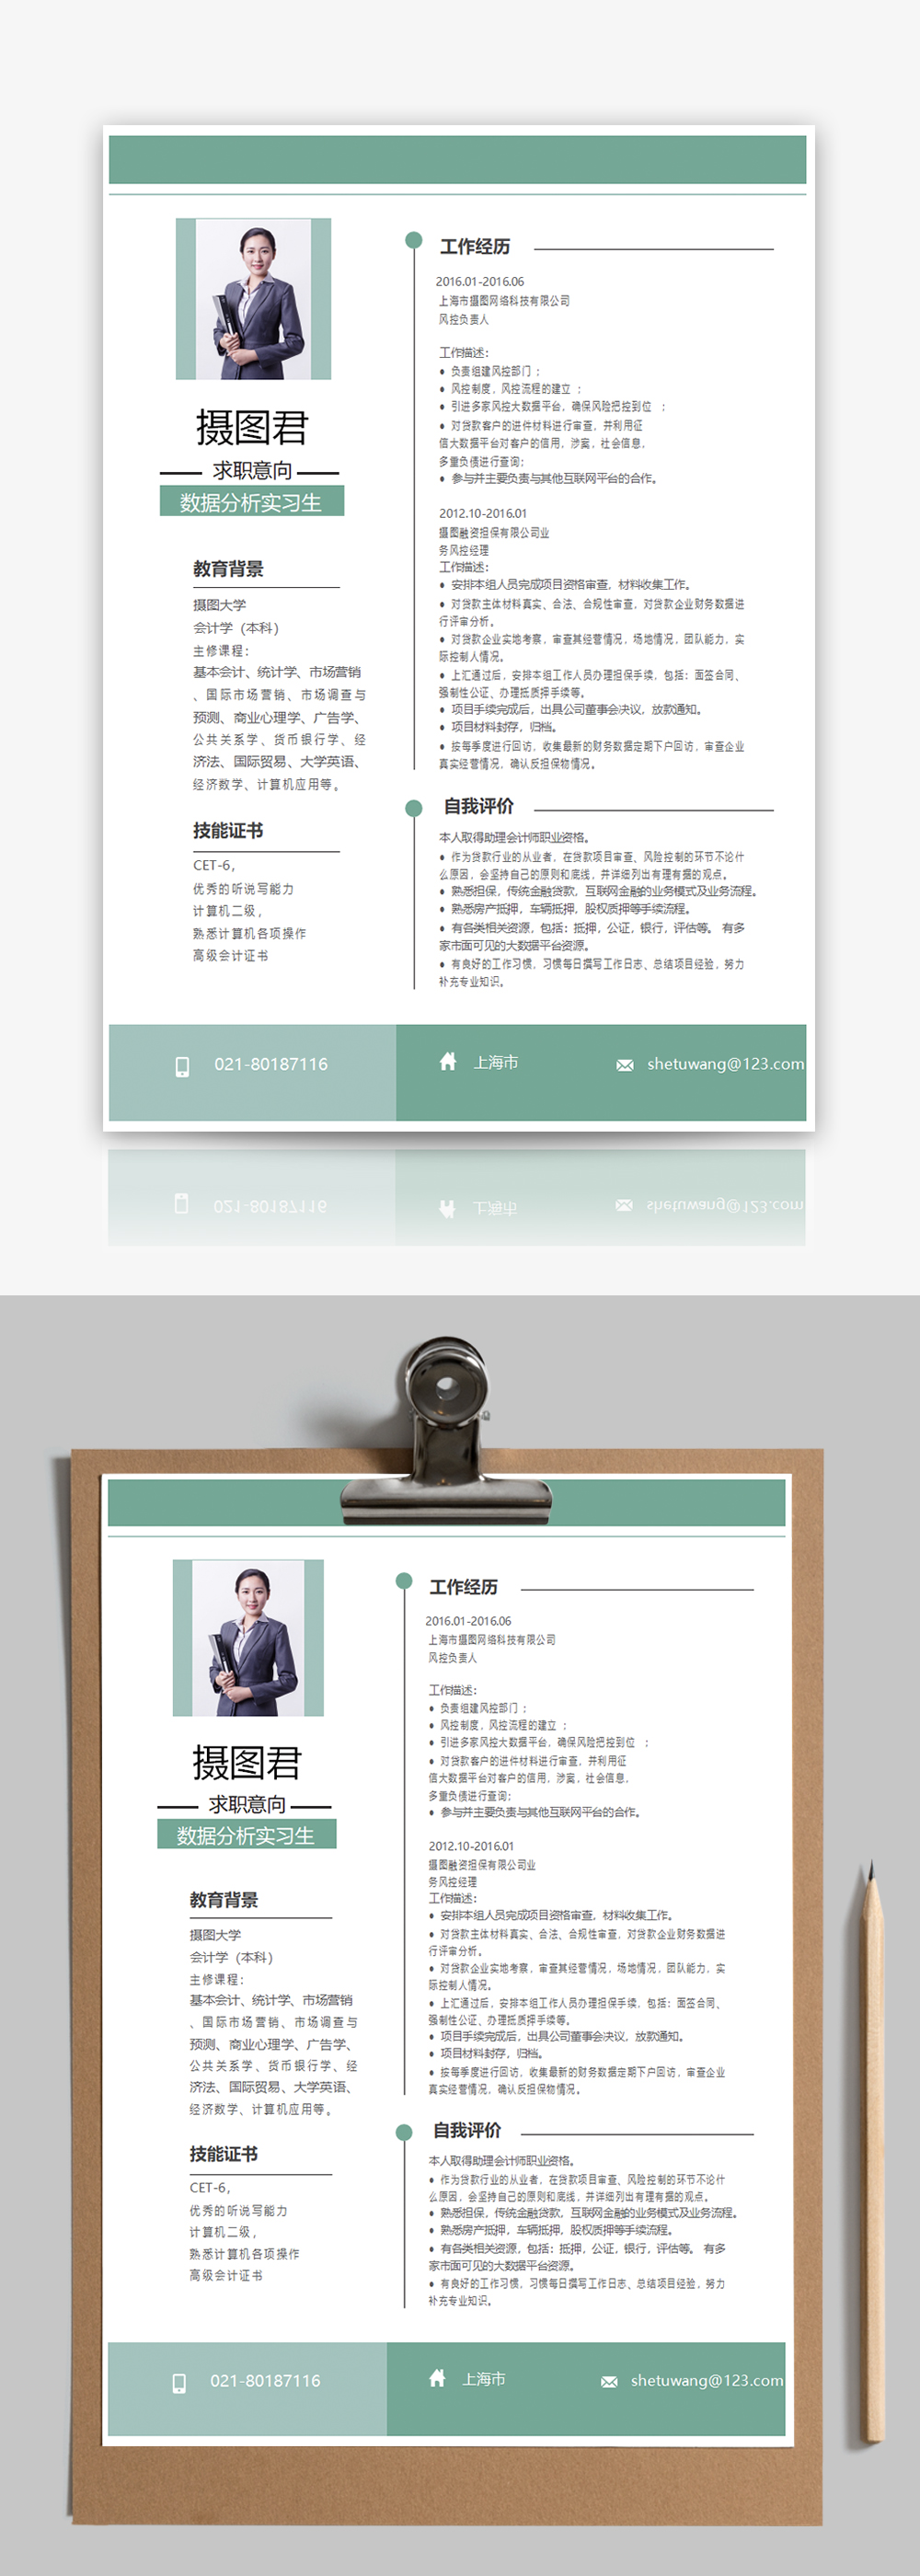 Data analyst resume template word template_word free download 400138731 ...